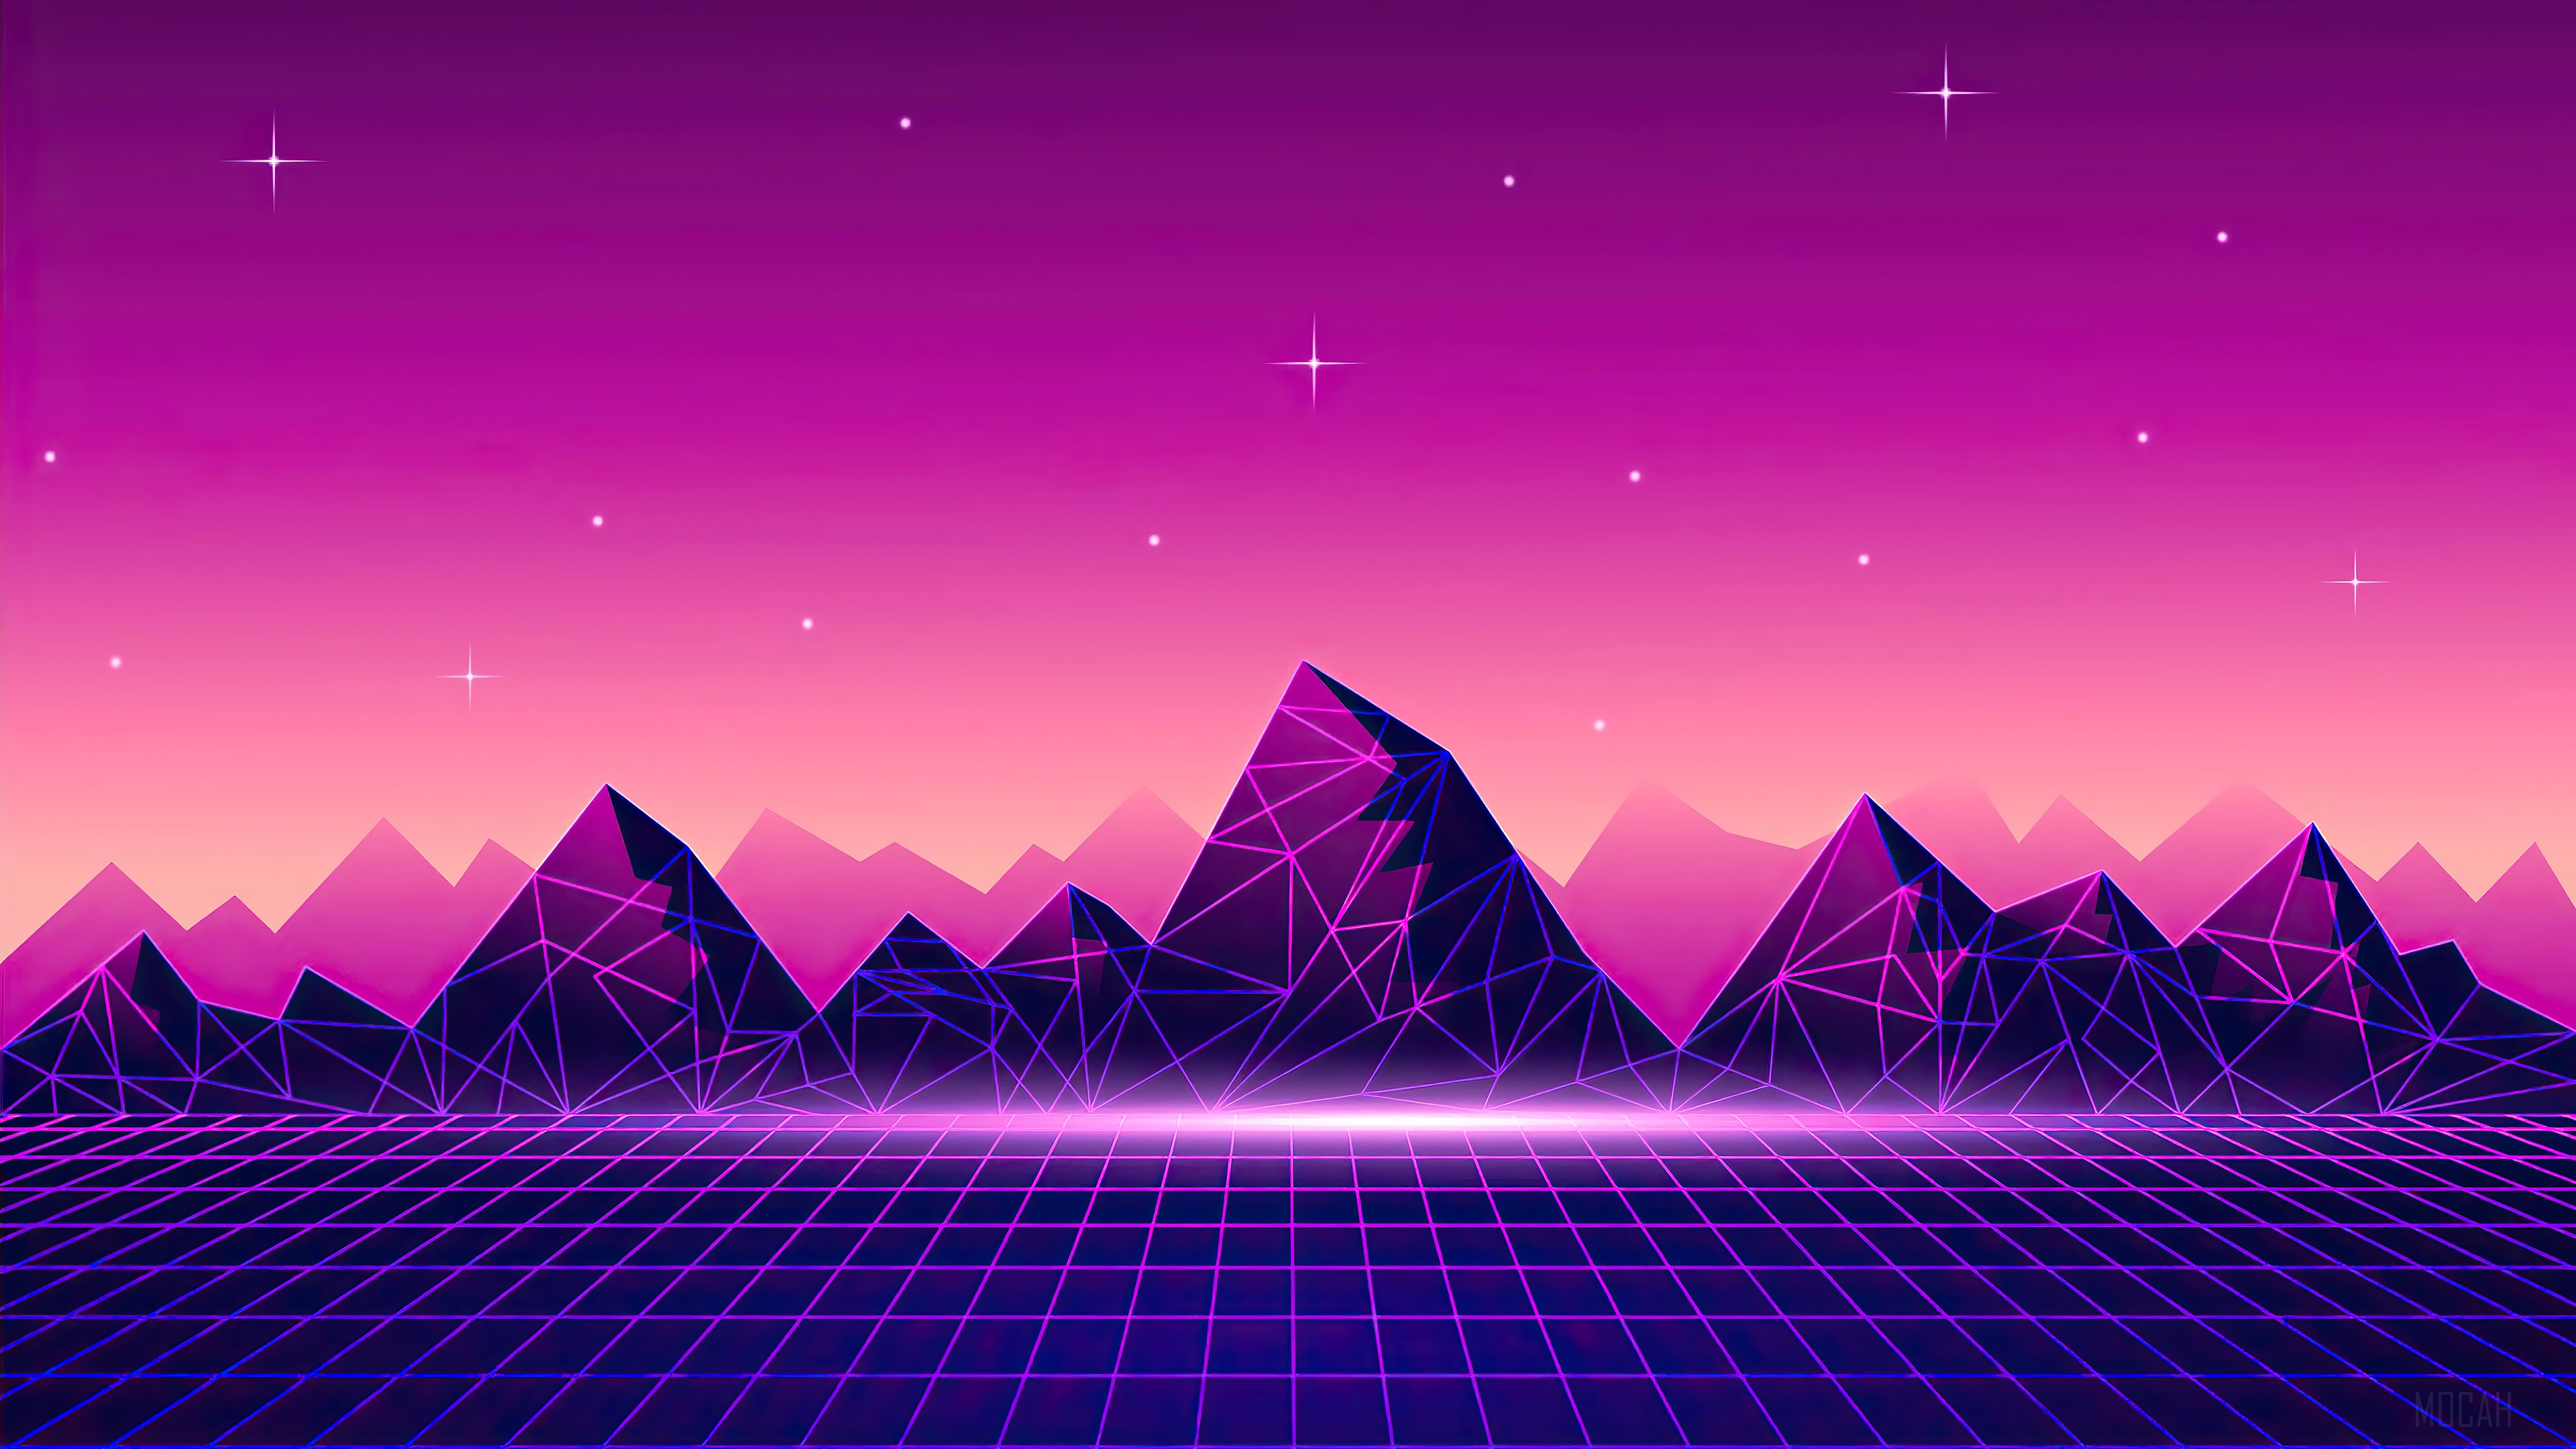 Vaporwave p k k hd wallpapers backgrounds free download rare gallery